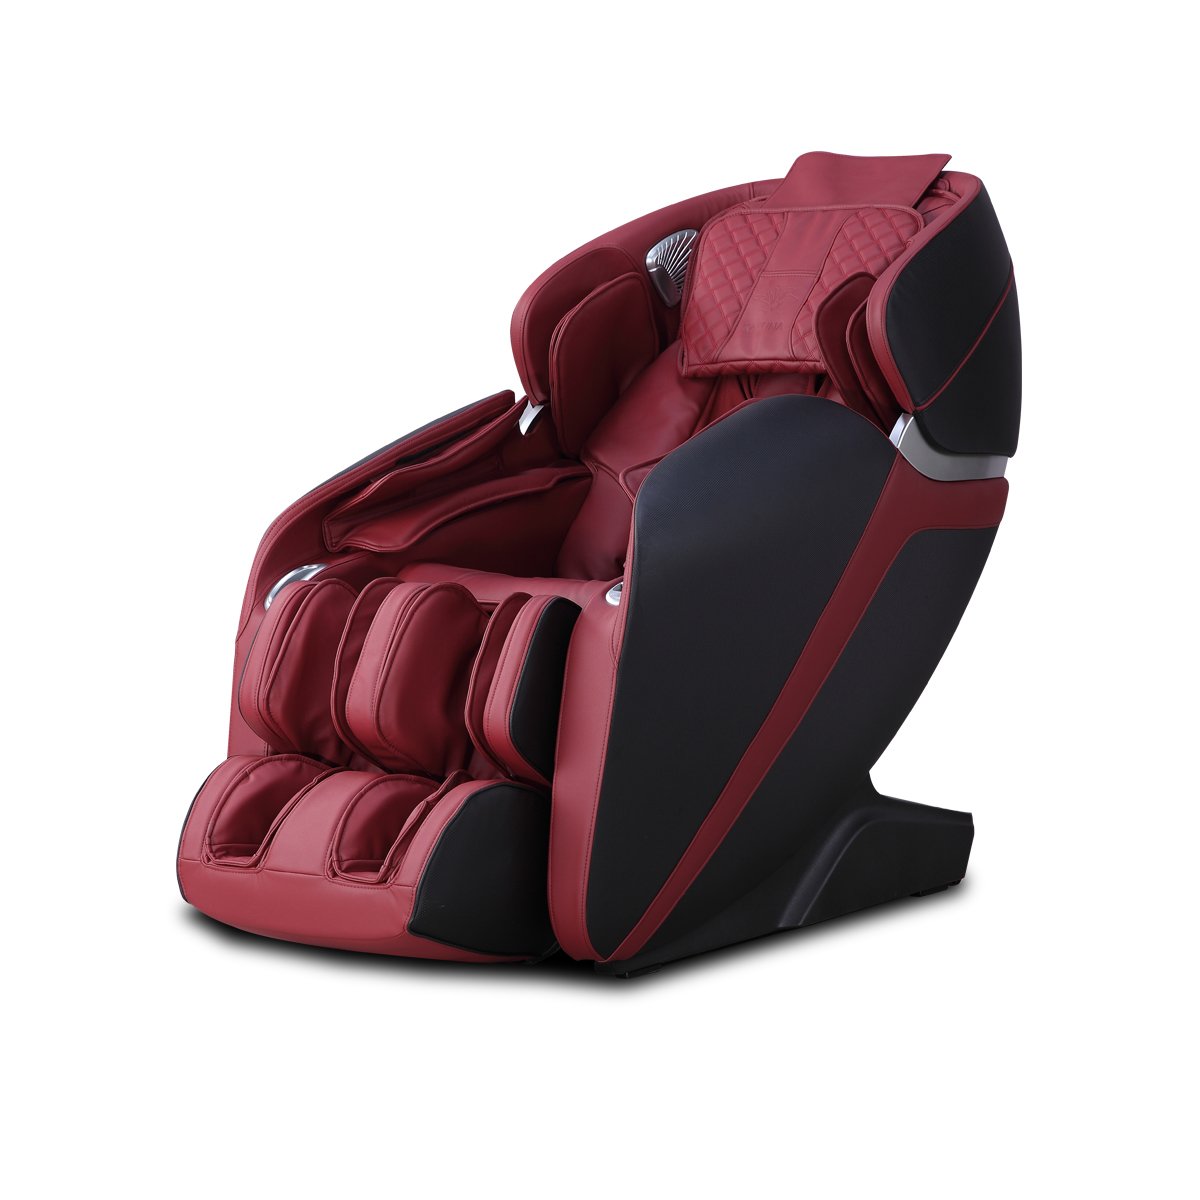 Kahuna LM7000 massage chair red